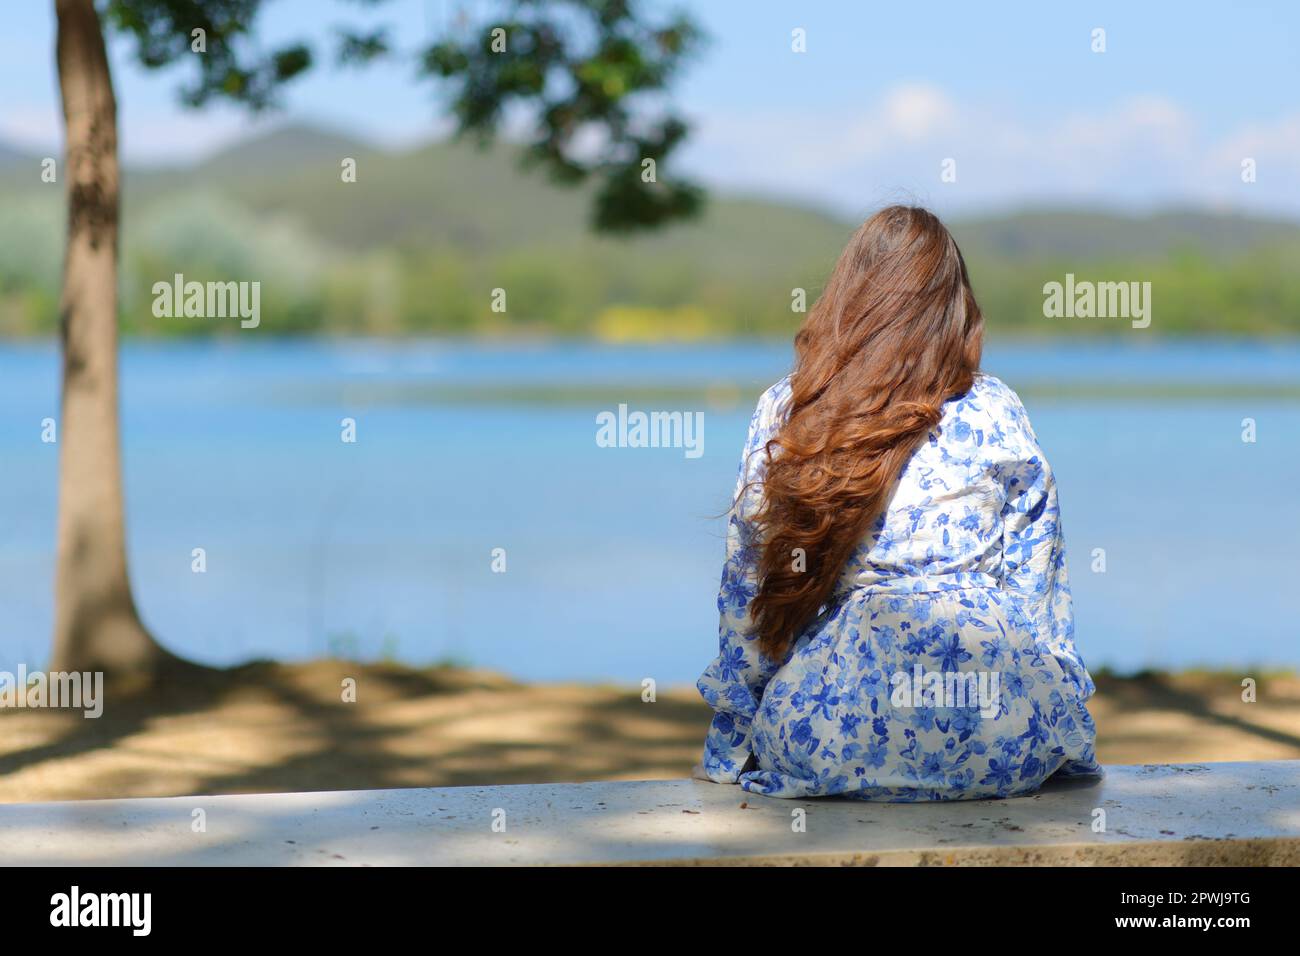 Back view portrait of a woman contemplating sitting on a bench in a lake Stock Photo